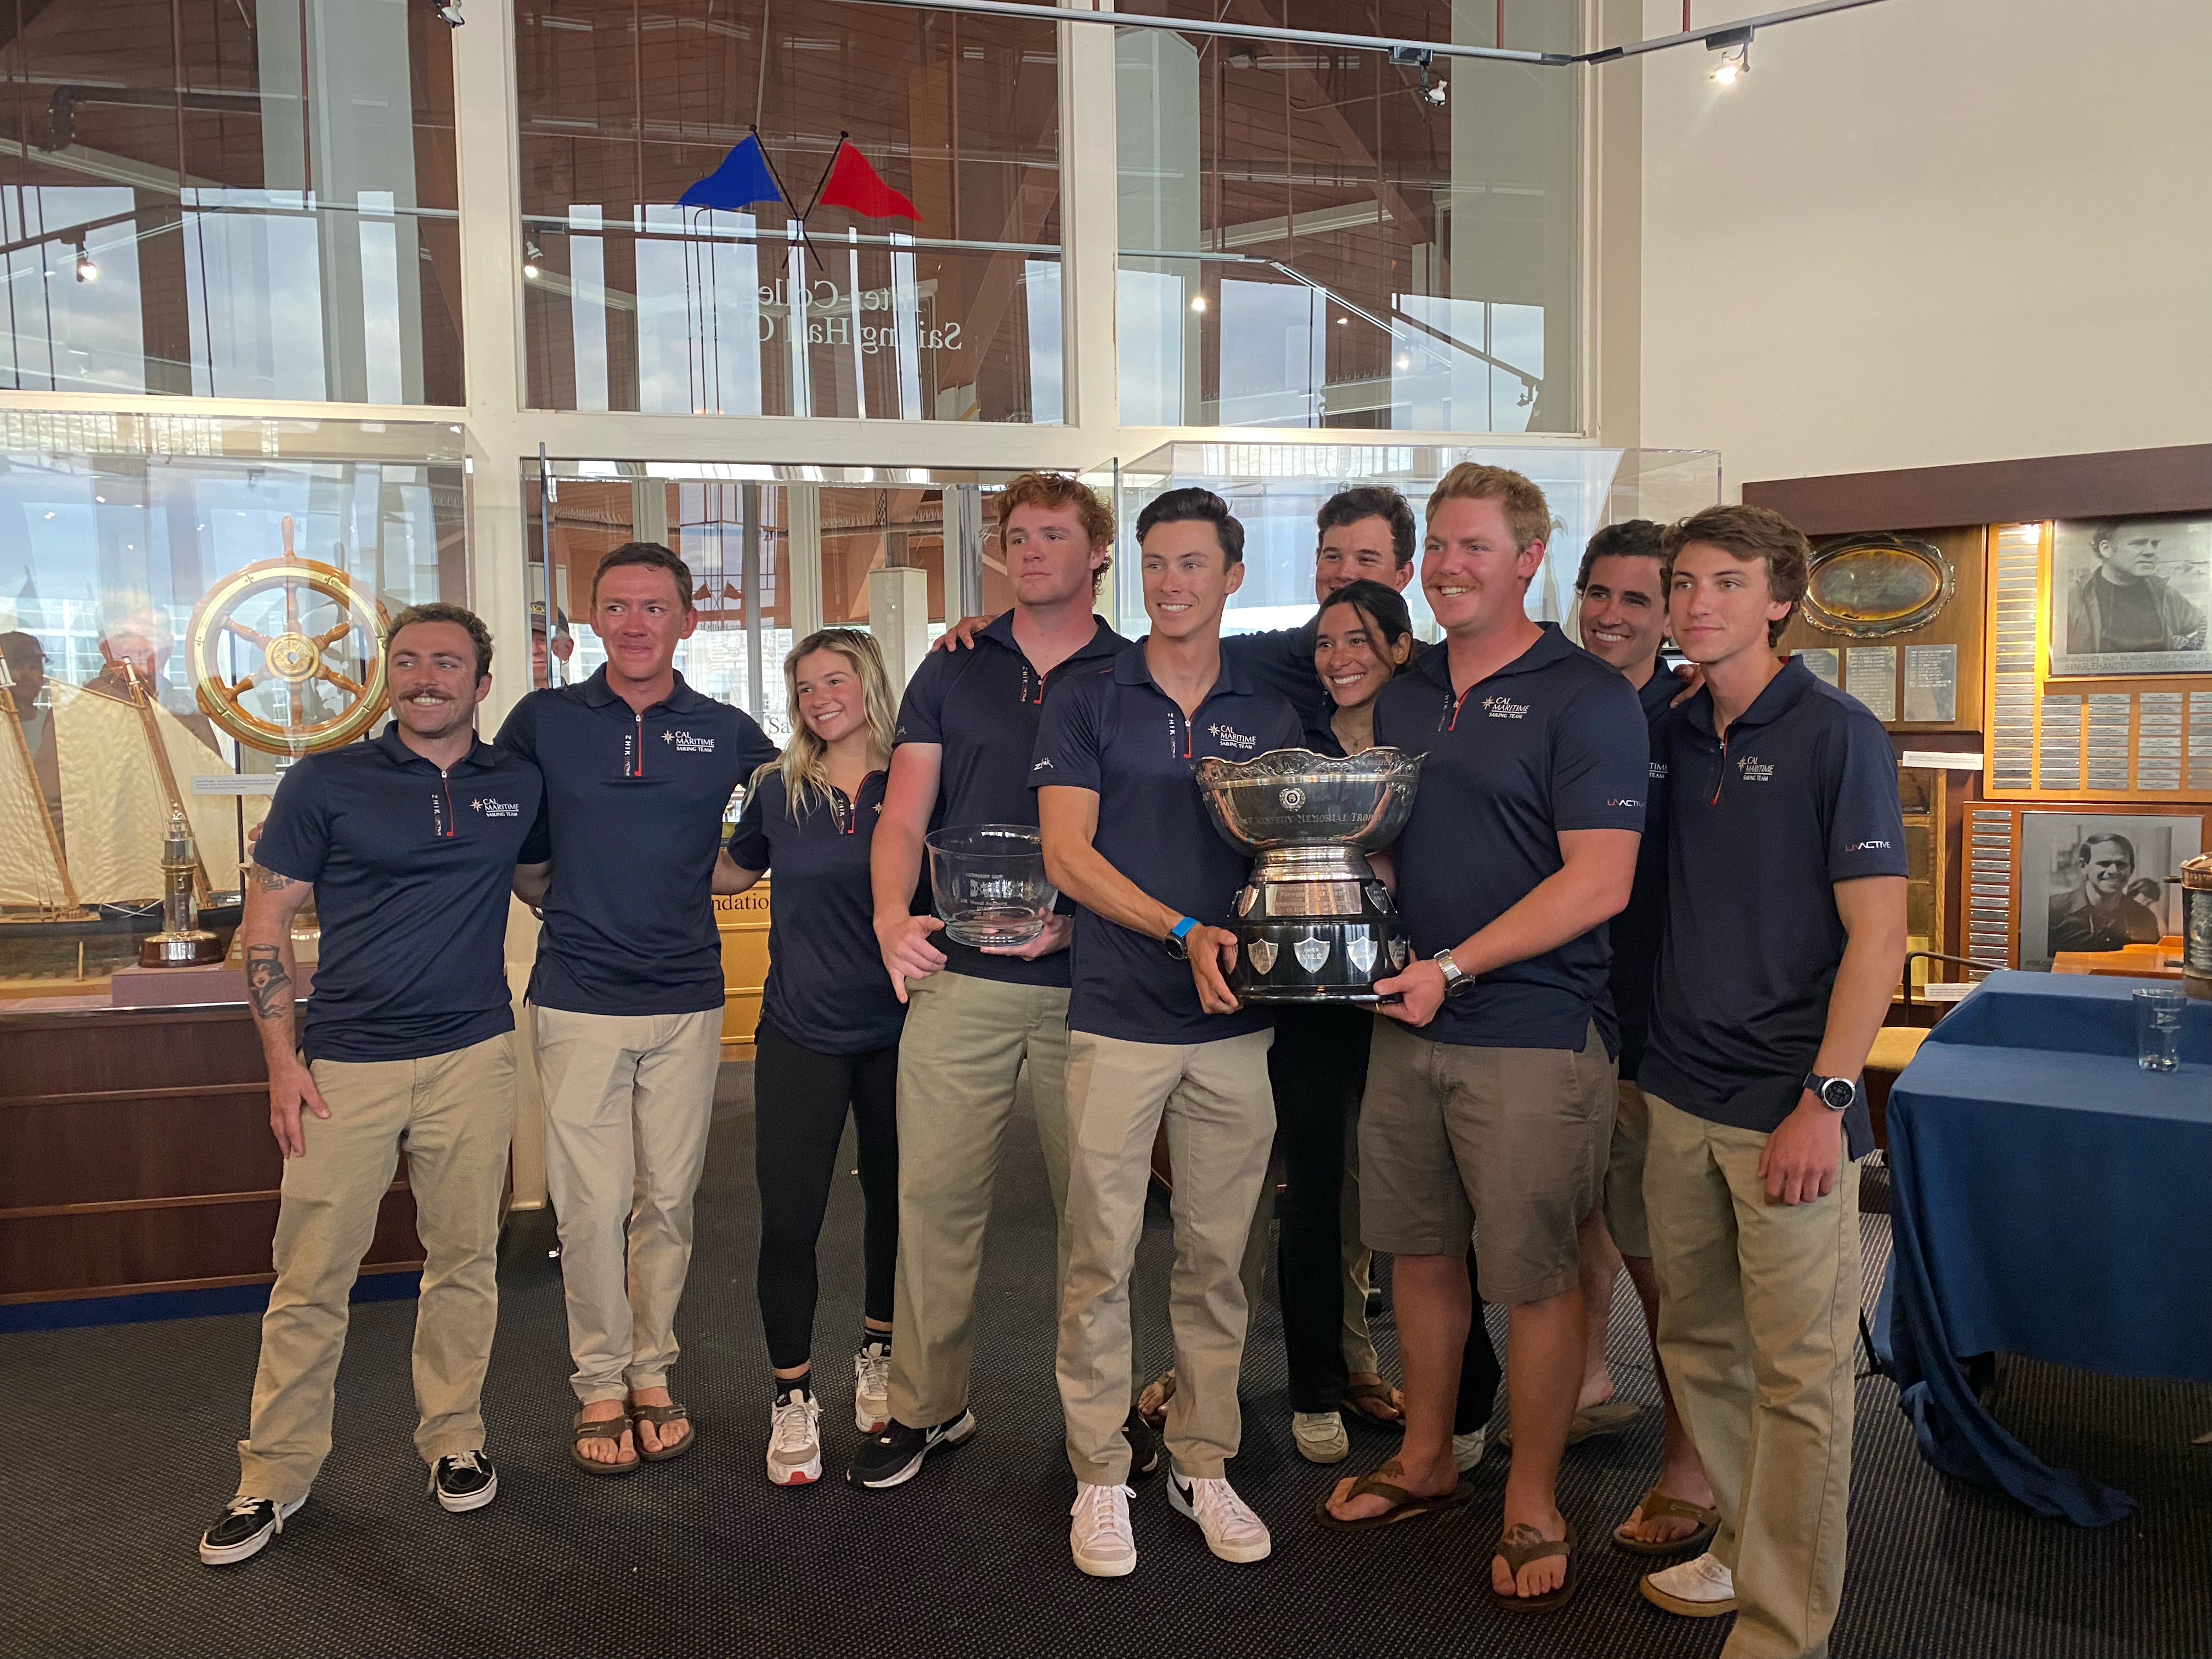 Sailors from the nation’s top college programs were back on the water for the Kennedy Cup as the Keelhaulers prevailed.